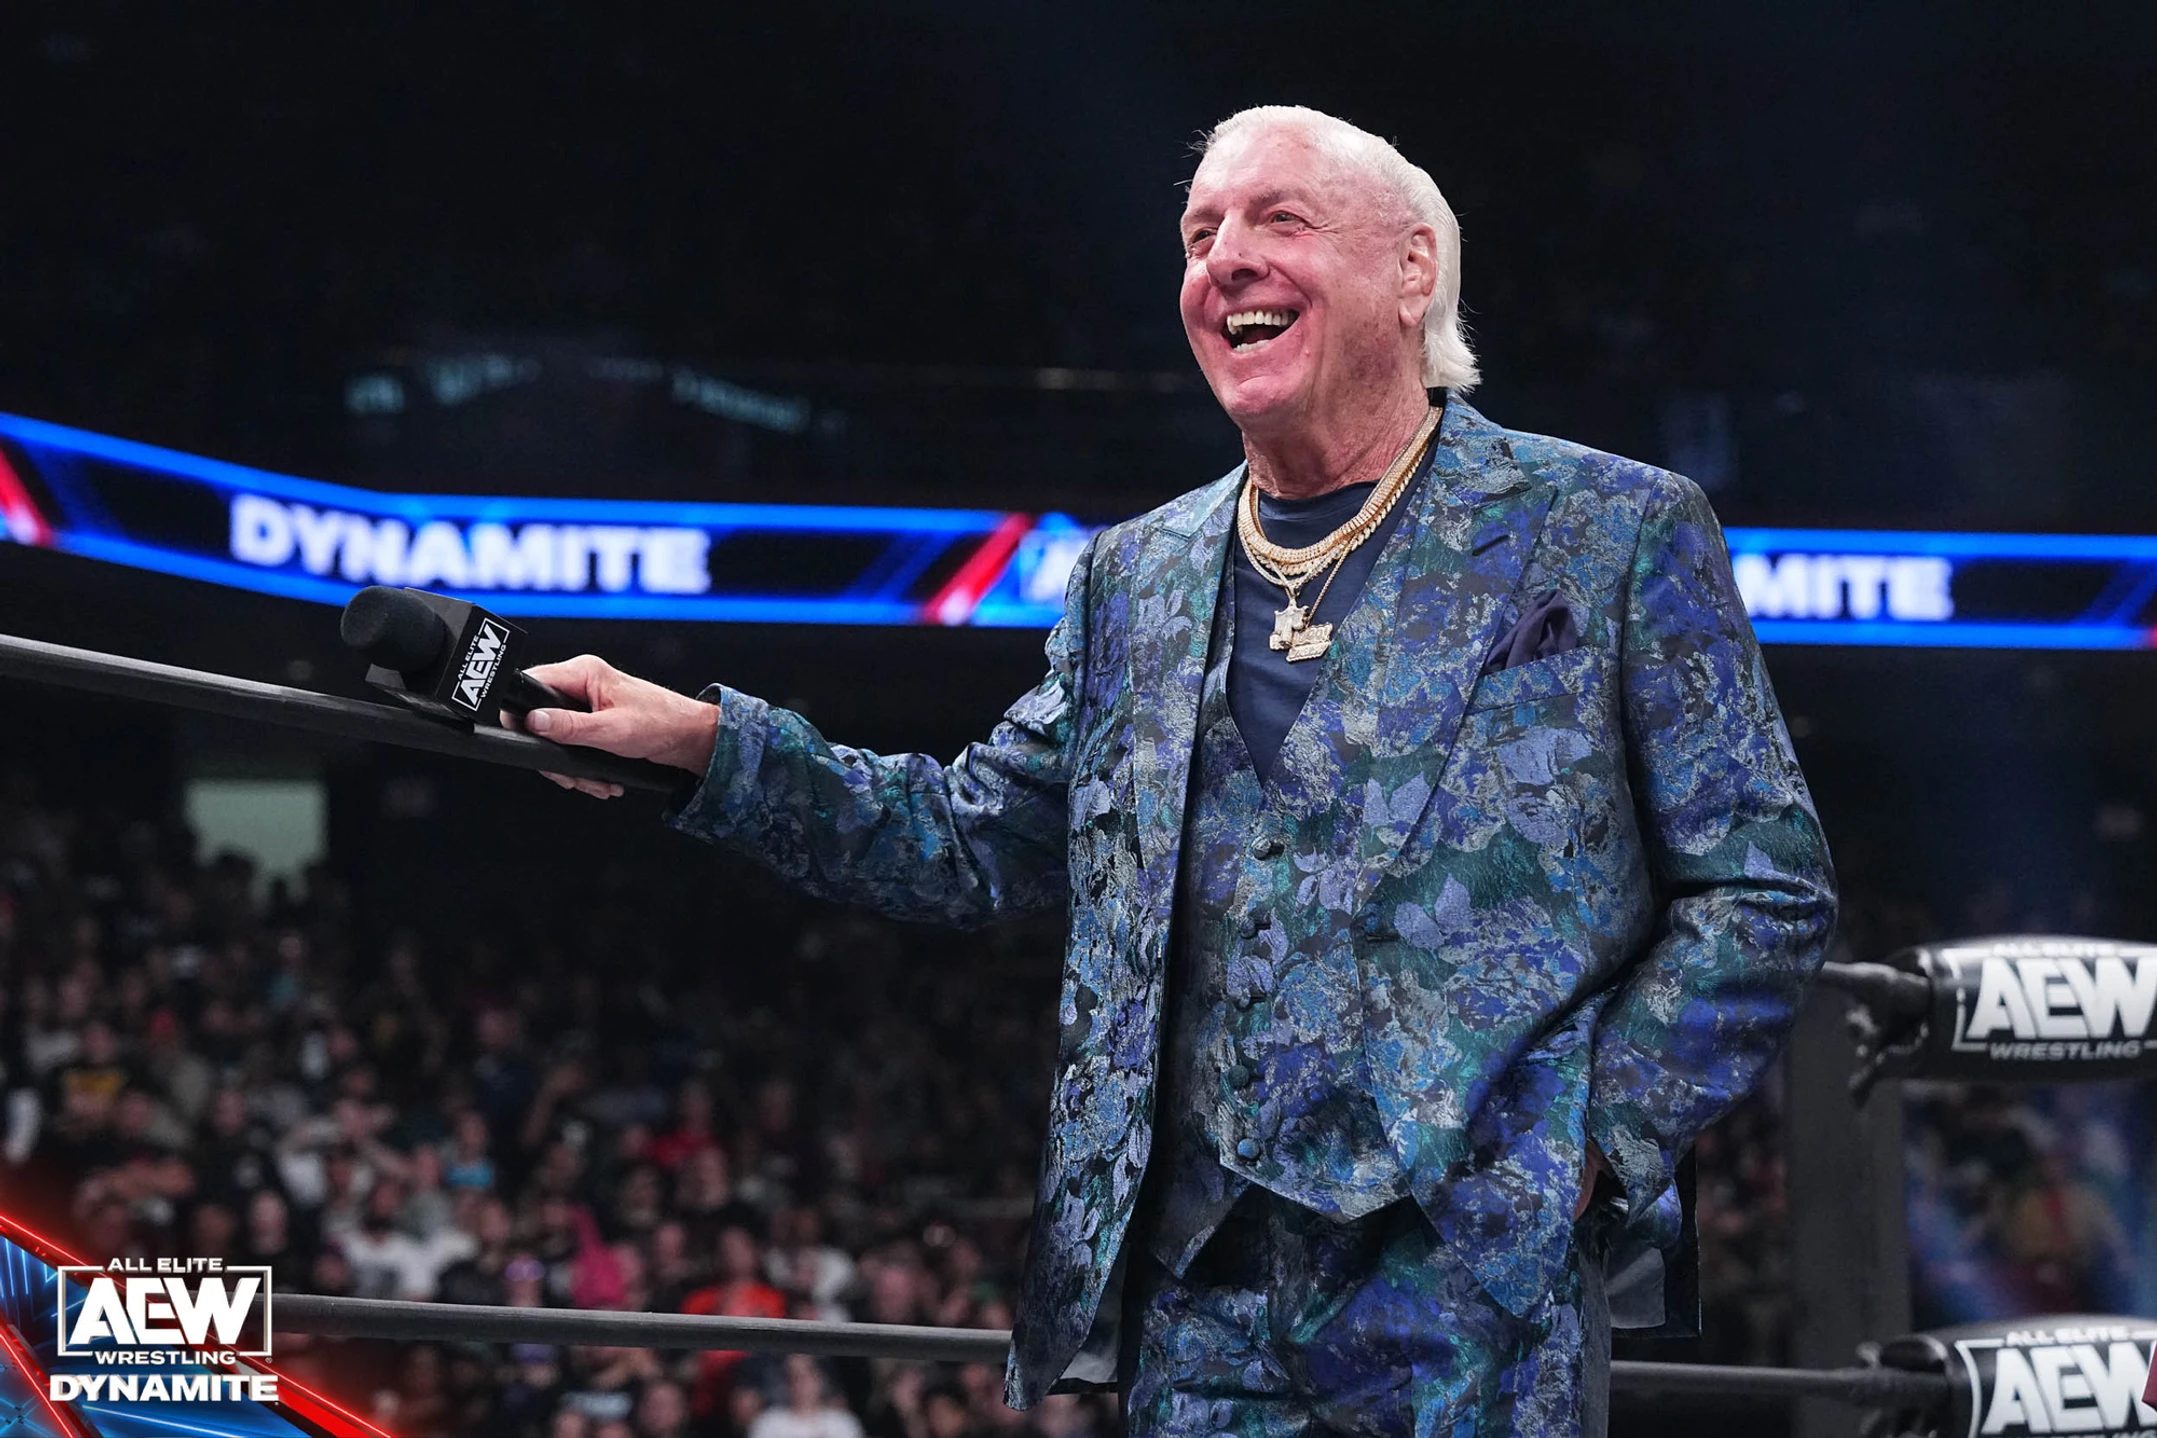 Ric Flair Commends The Rock as the Most Entertaining Wrestler in the History of the Wrestling Industry